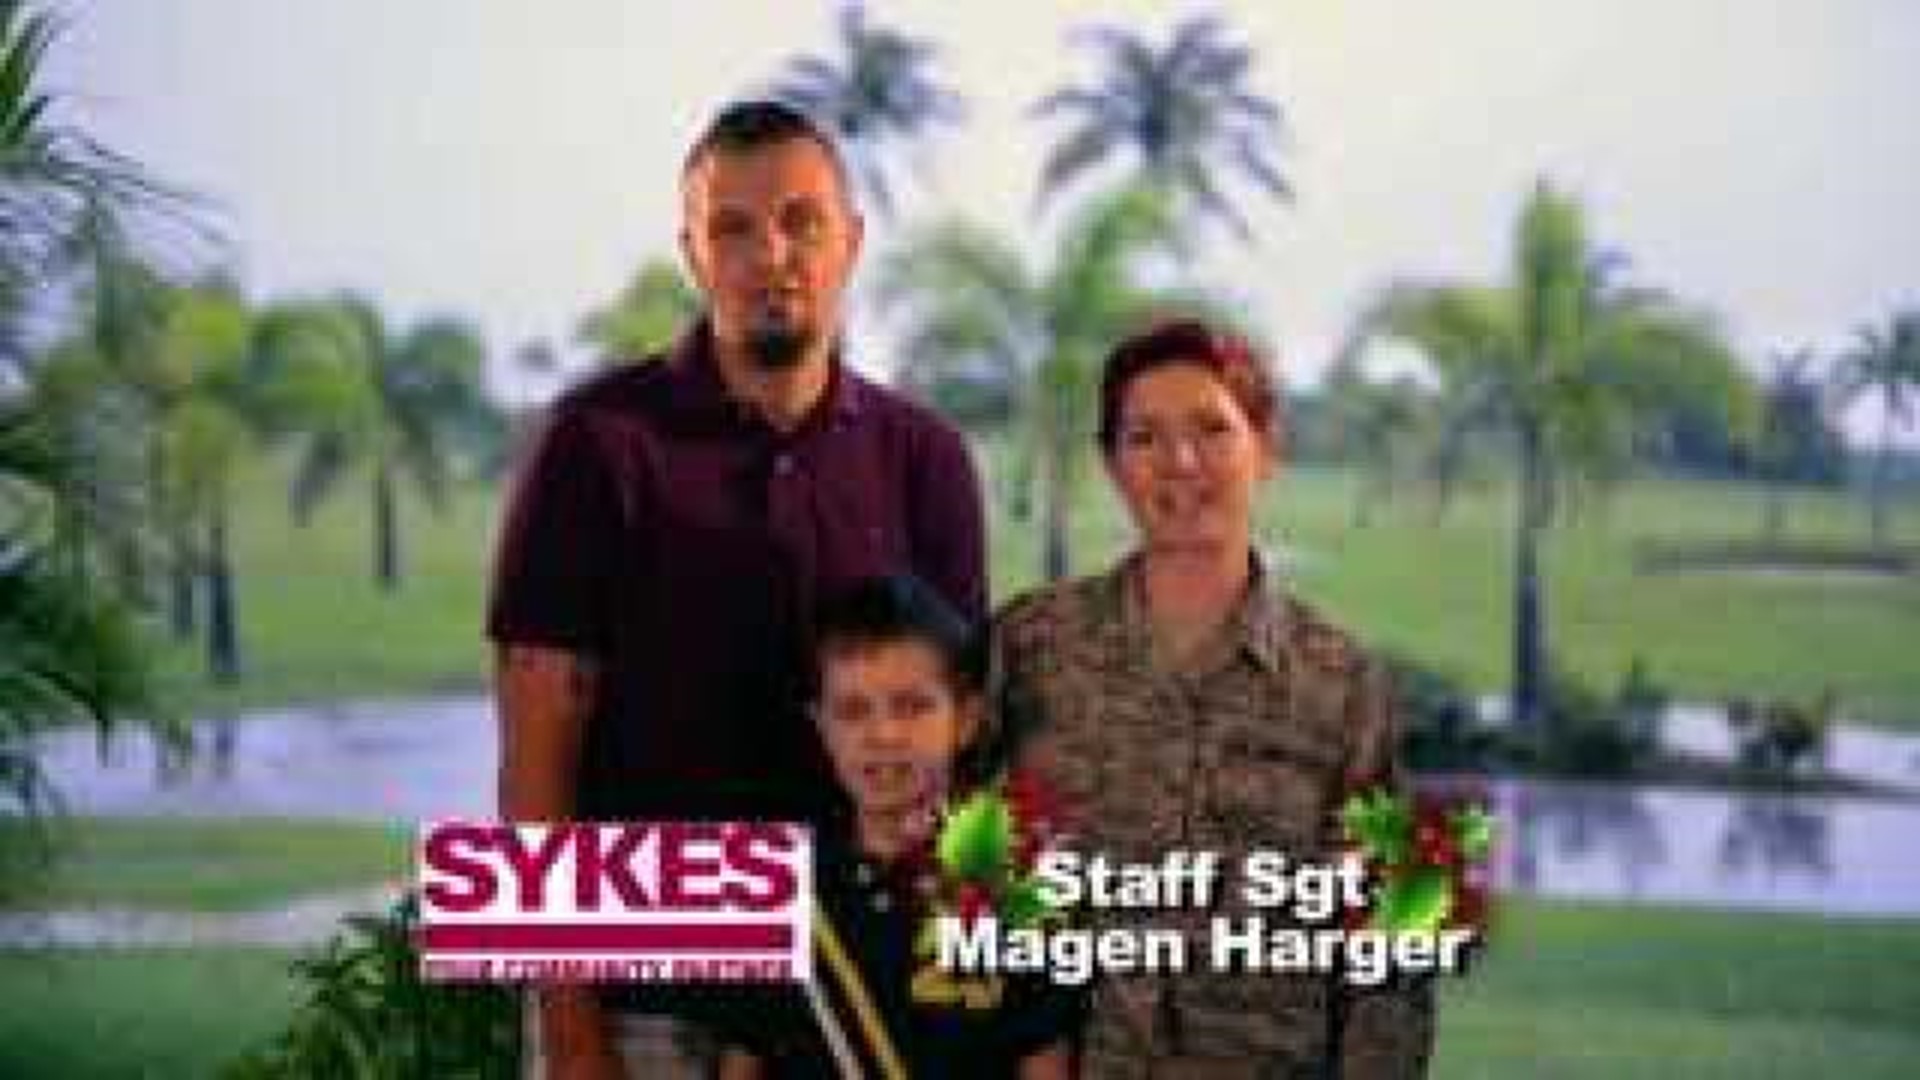 Military Greetings: Magen Harger